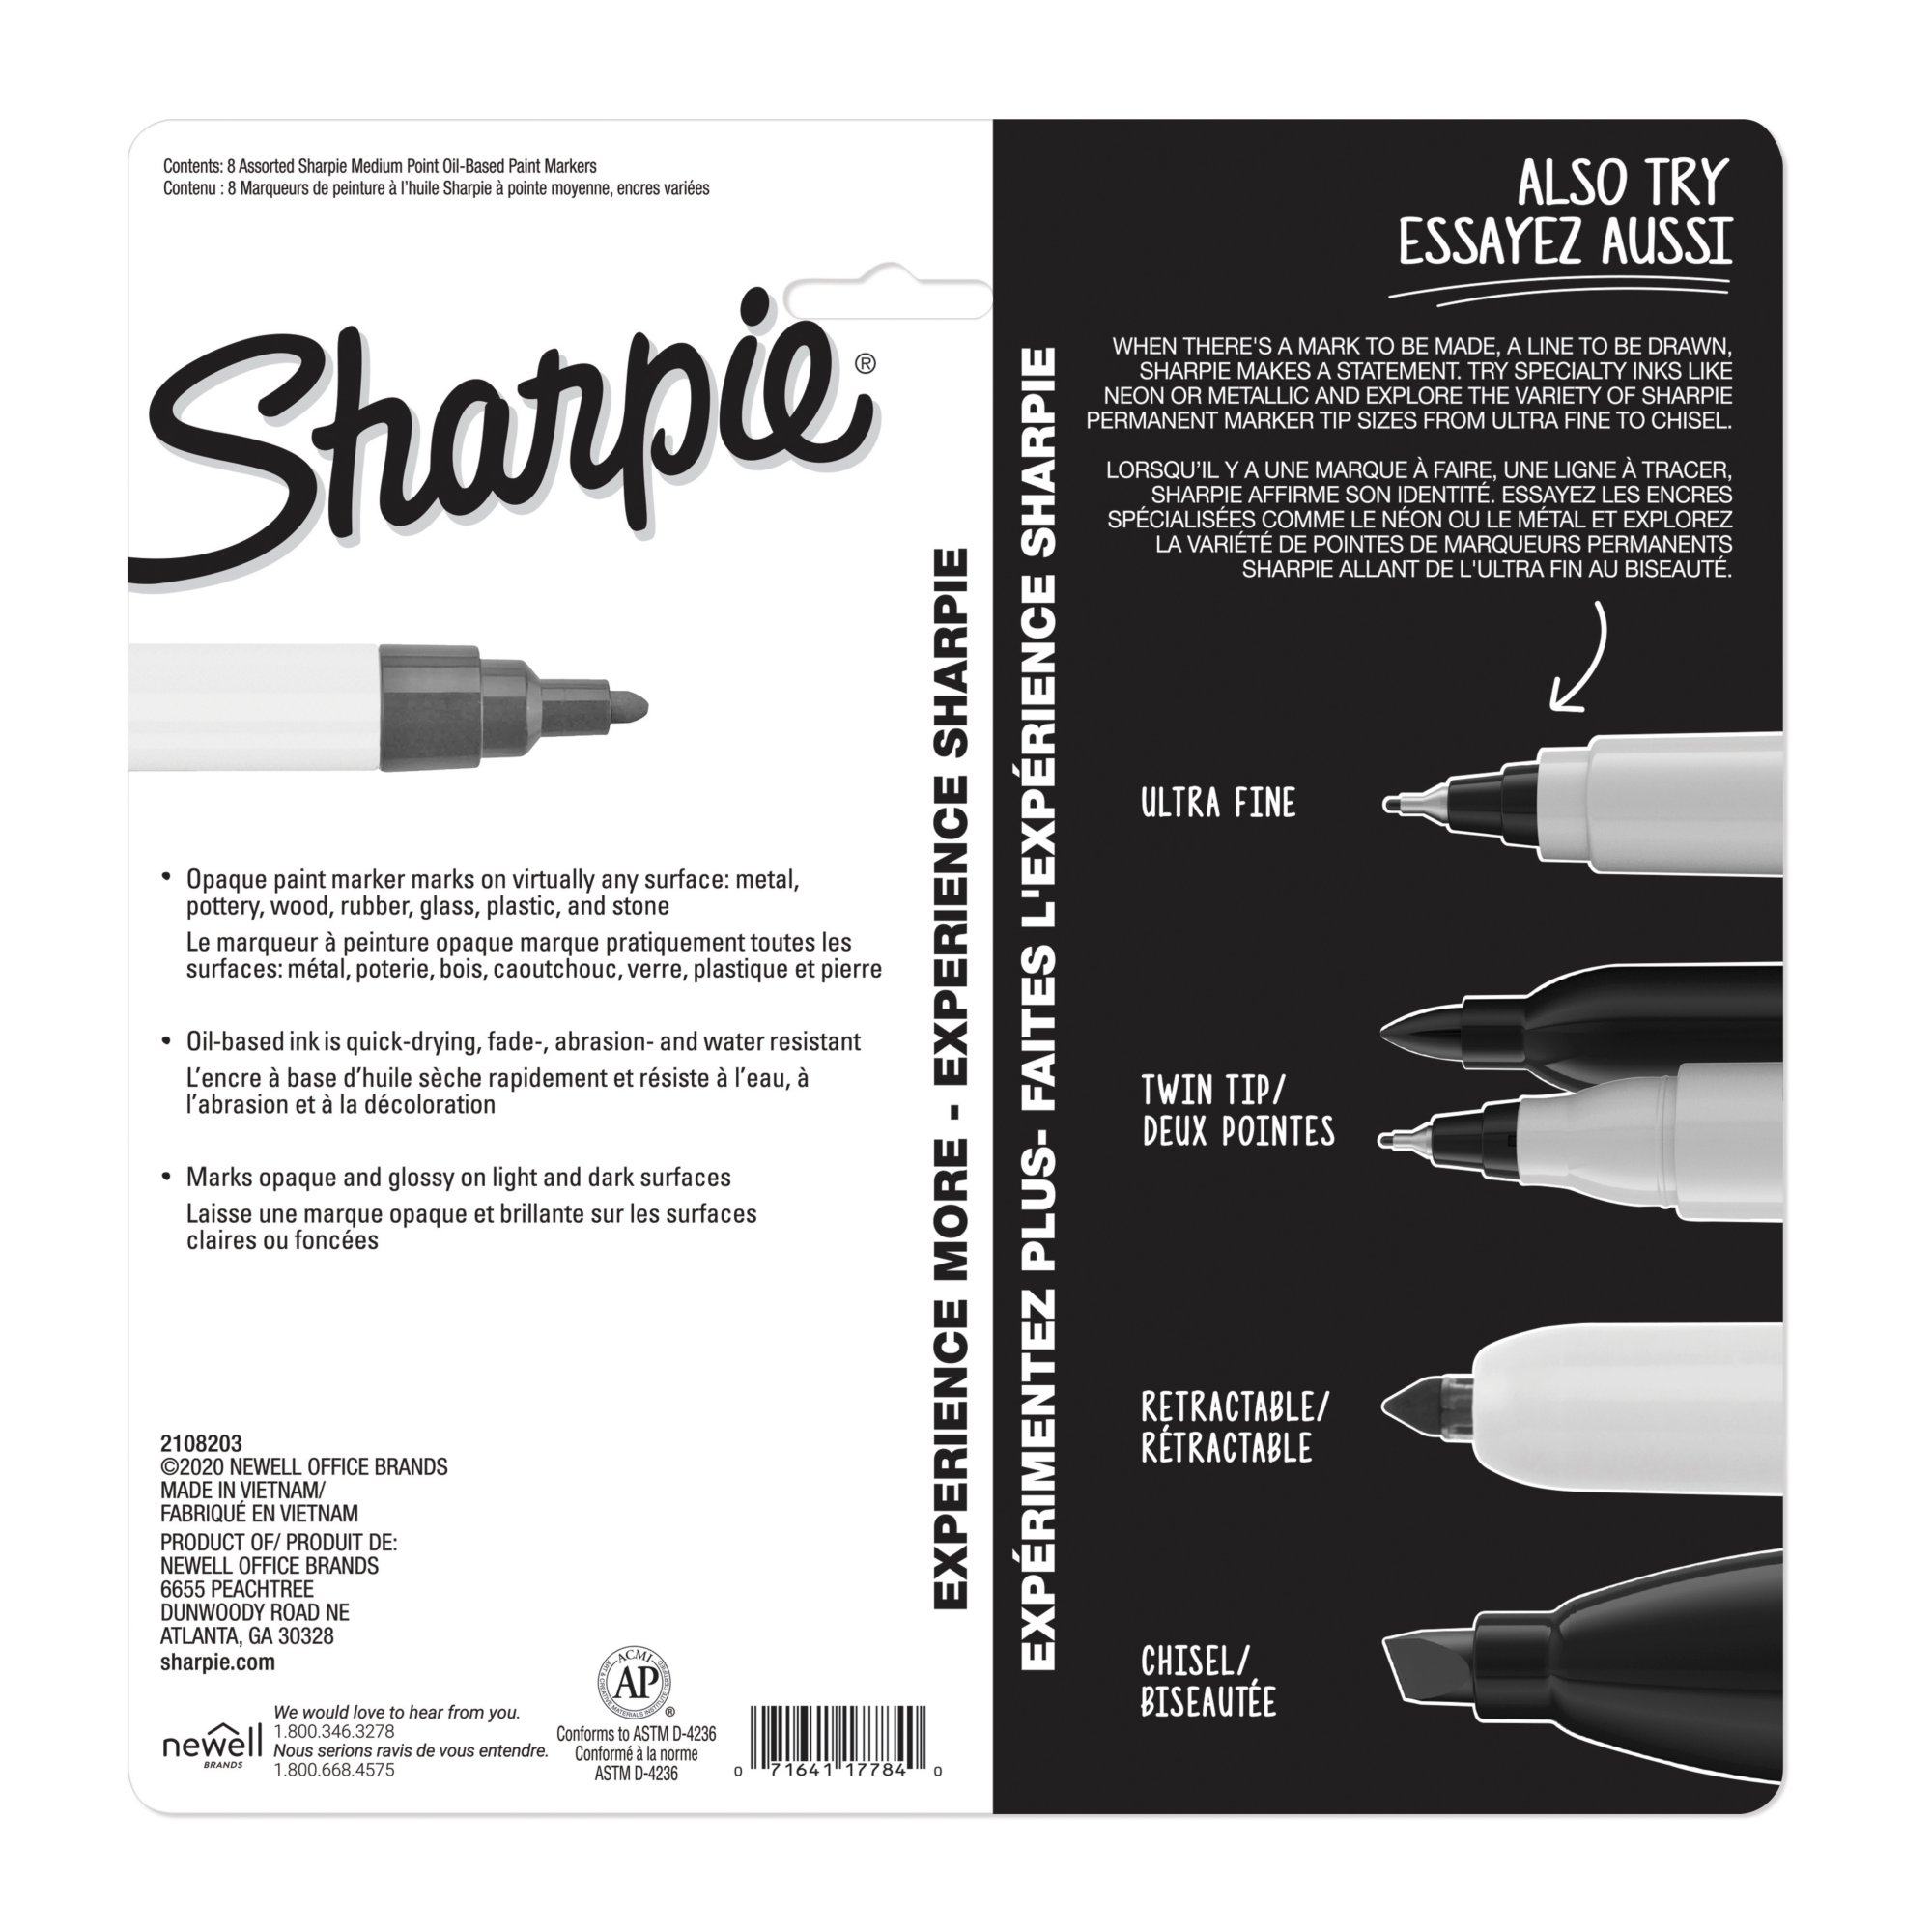 Sharpie Oil Based Paint Markers Assorted Colors Medium Tip 8 Pens 2140365